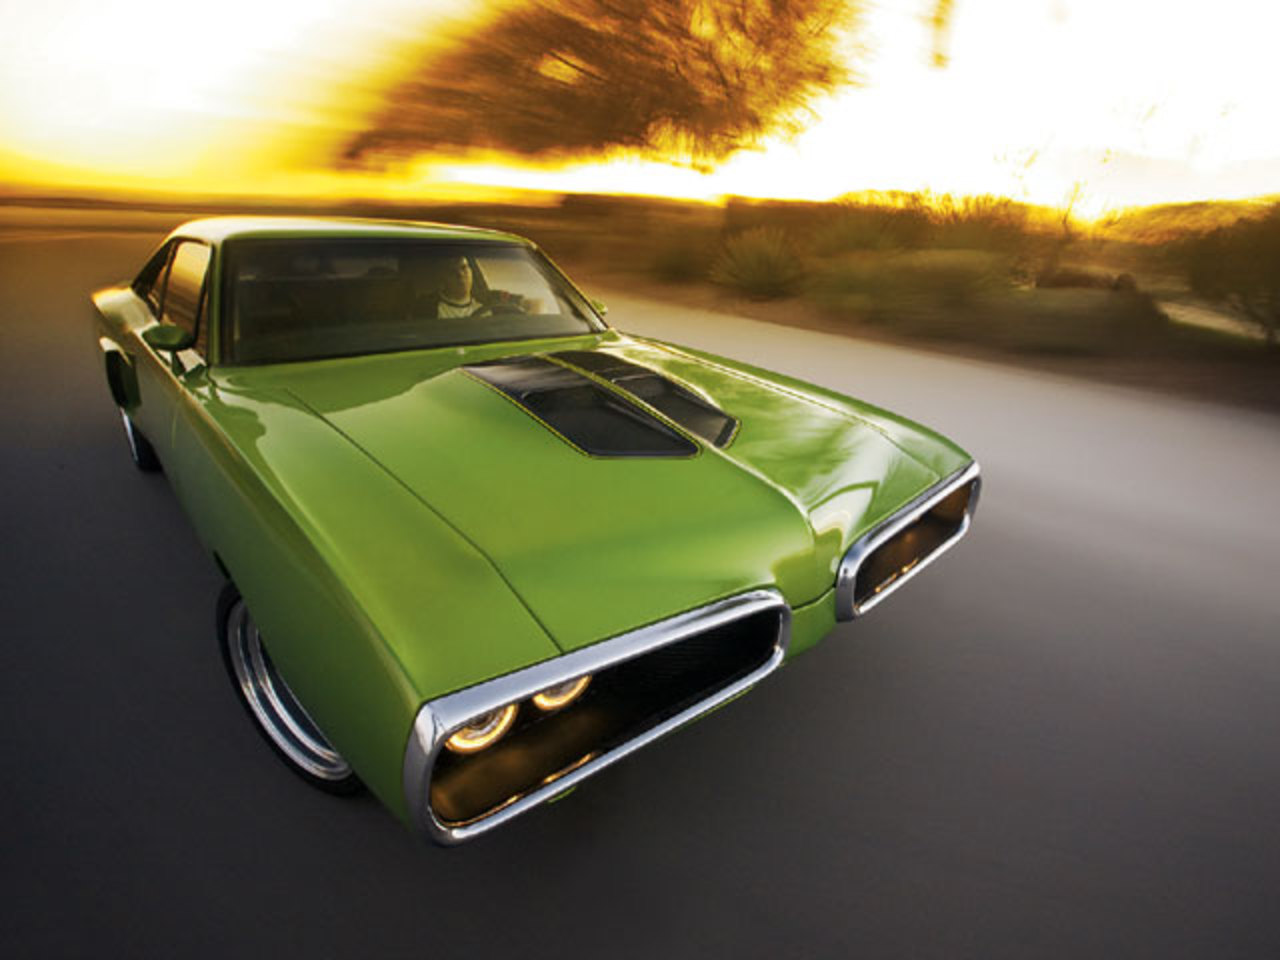 In 1970 the Dodge Super Bee got a nose job. The front end was fitted with a